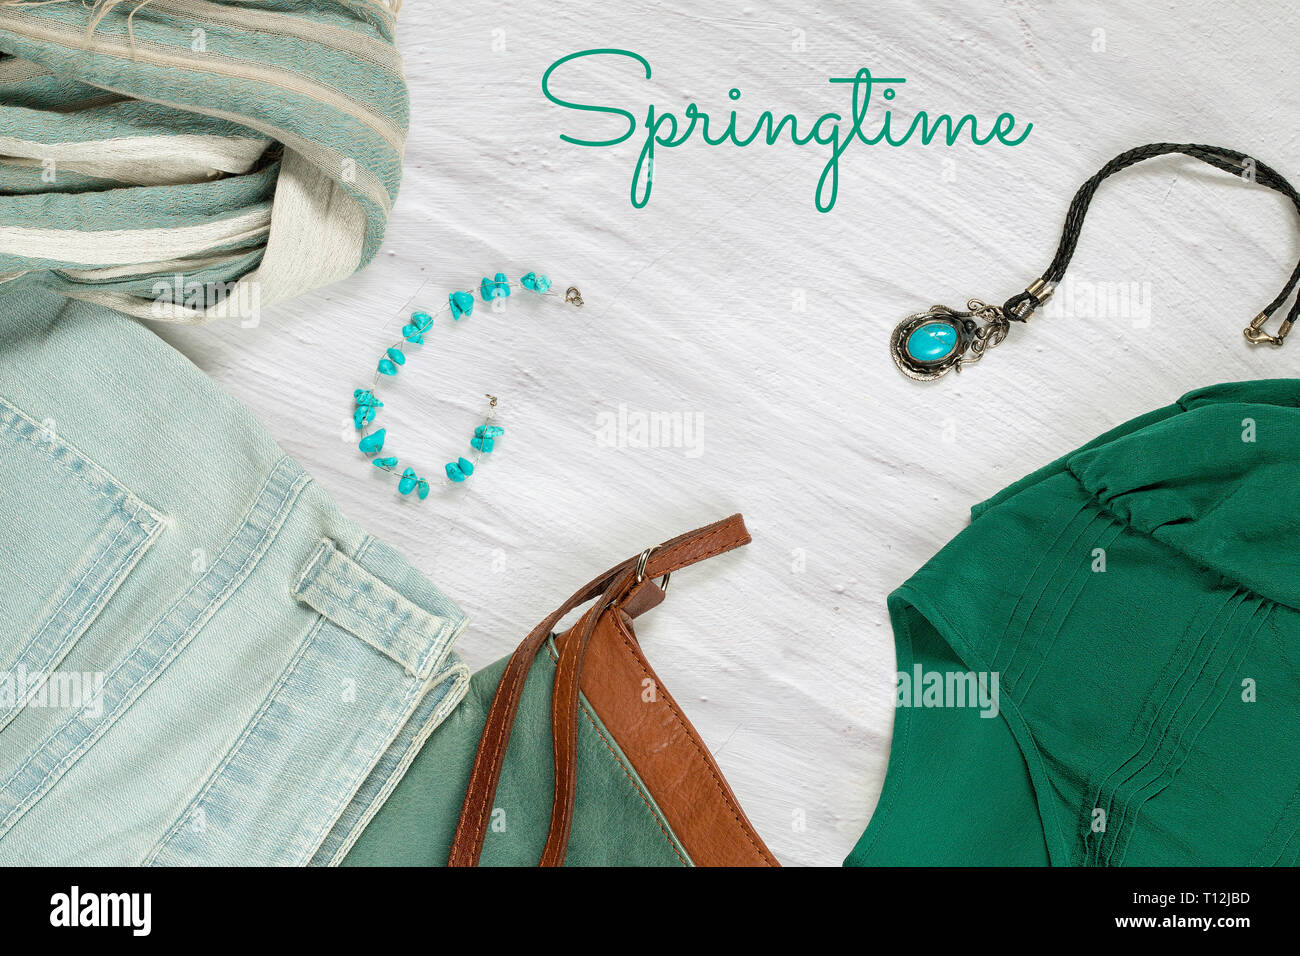 Set of women's clothing - jeans, blouse, scarf, leather cross body bag,  accessories and Springtime text on a white limed background. Spring female  clo Stock Photo - Alamy